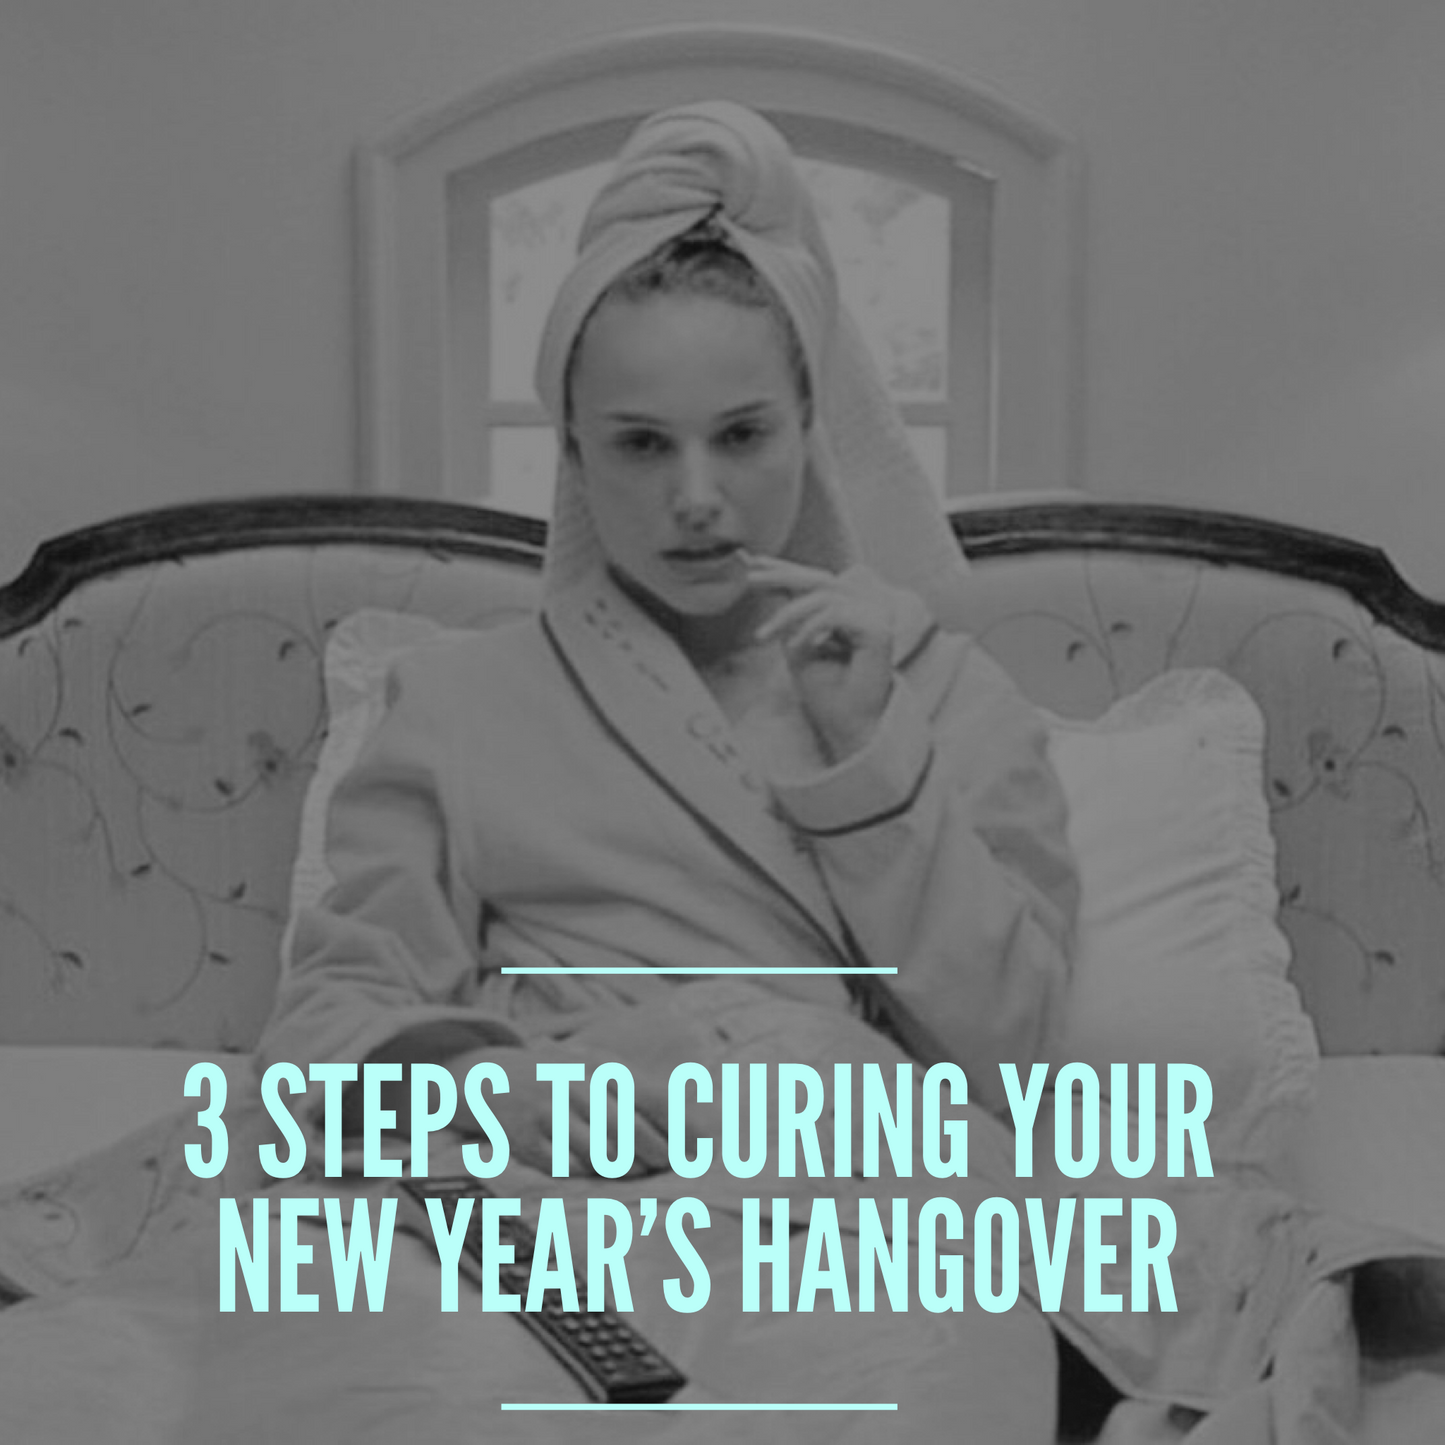 3 Steps To Curing Your New Year's Hangover